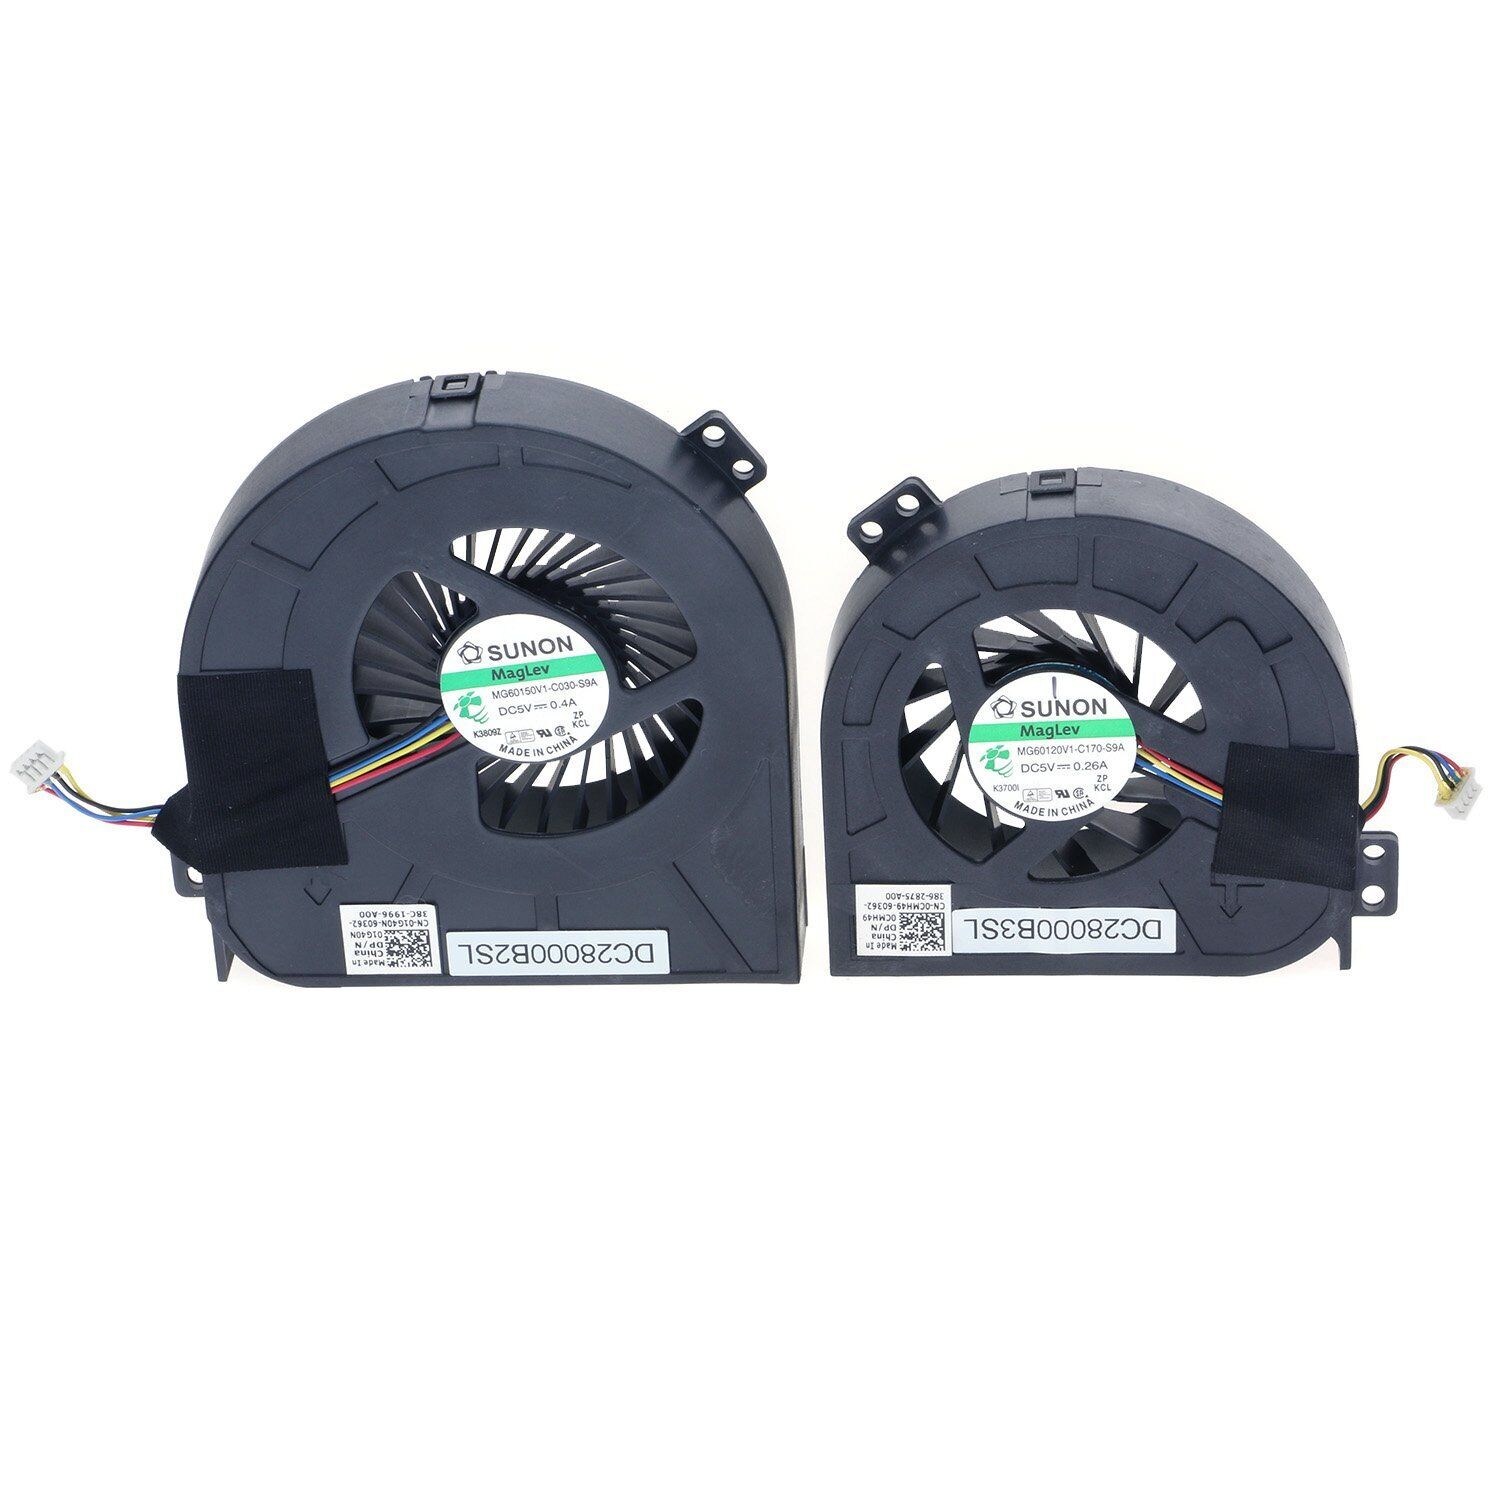 New OEM CPU+GPU Cooling Fan Left+Right For Dell Precision M4700 01G40N 0CMH49